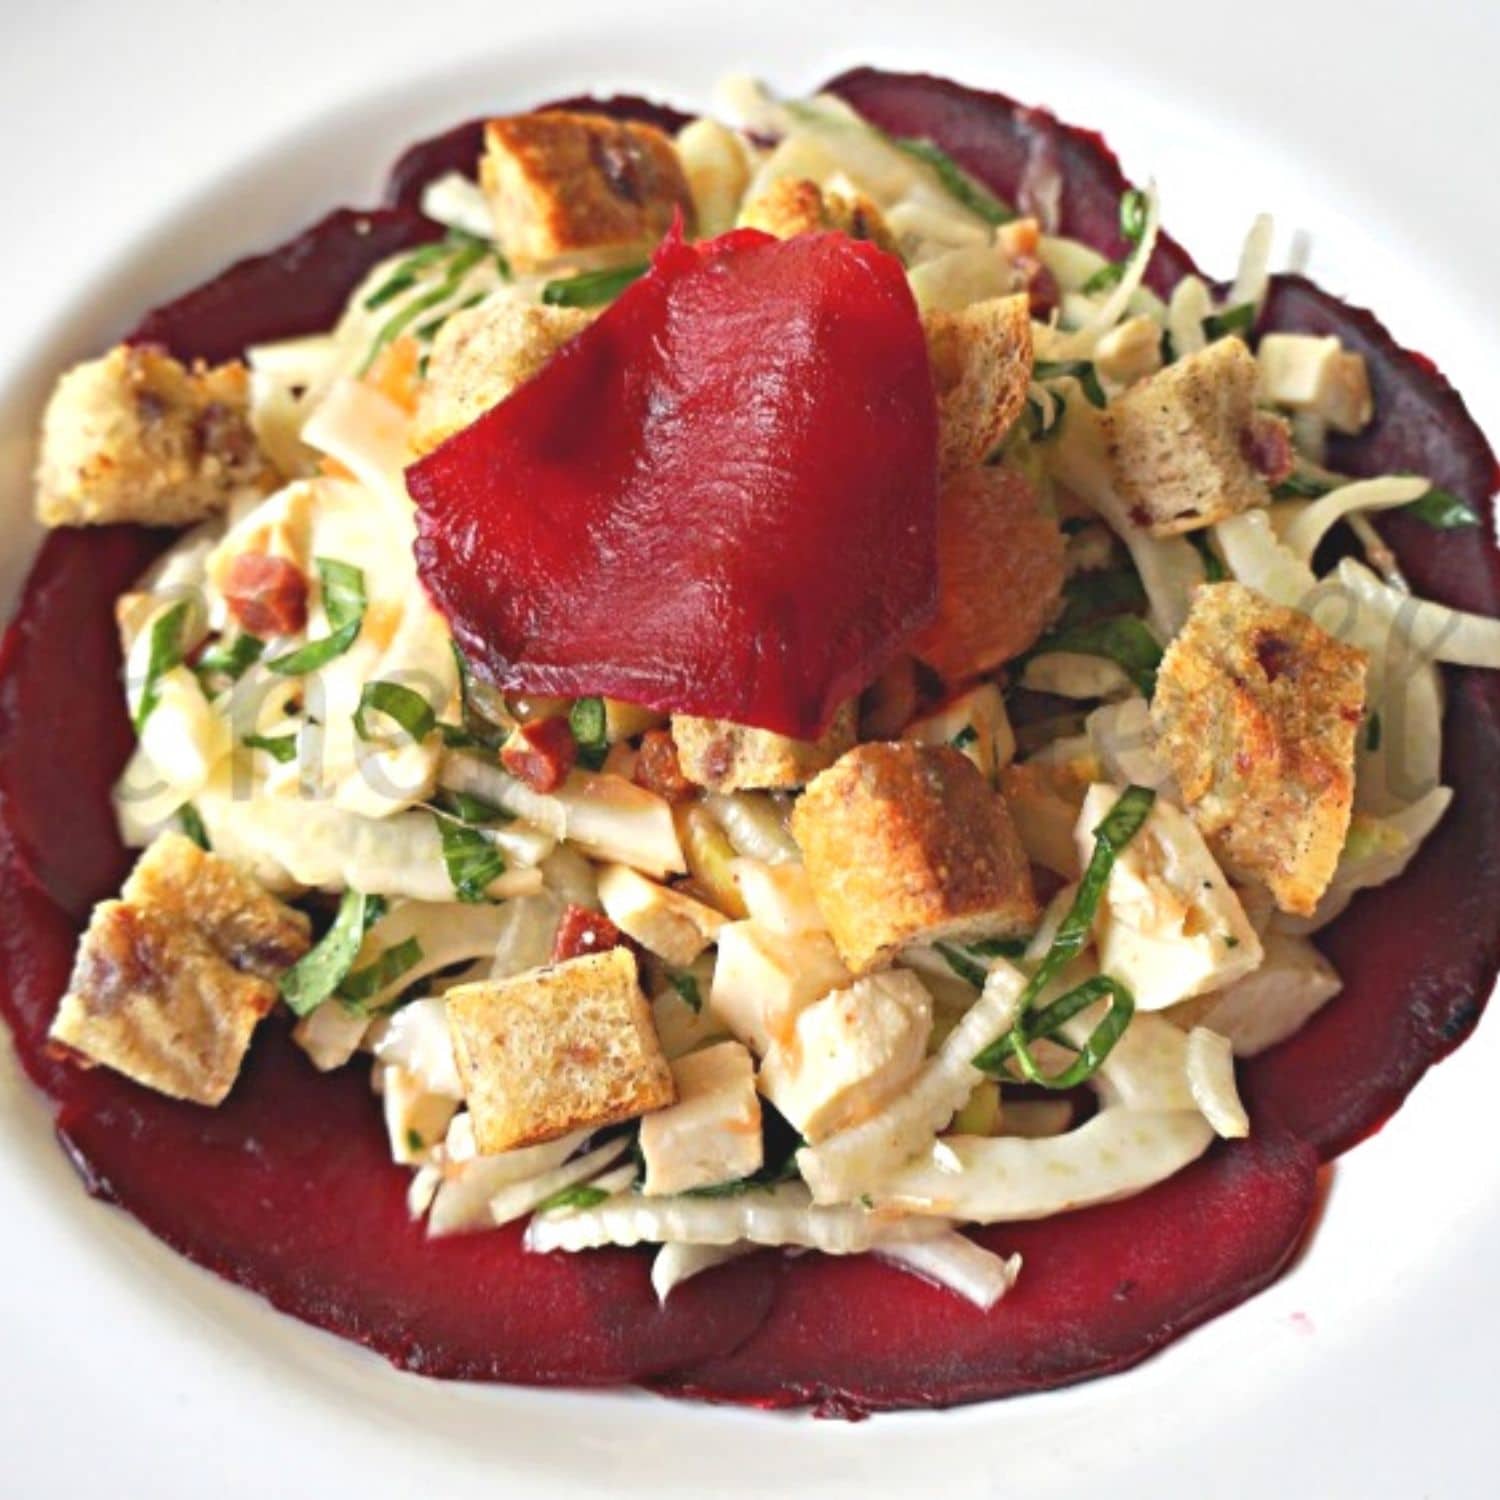 Assembled plate of Fennel Citrus Salad with Beetroot.